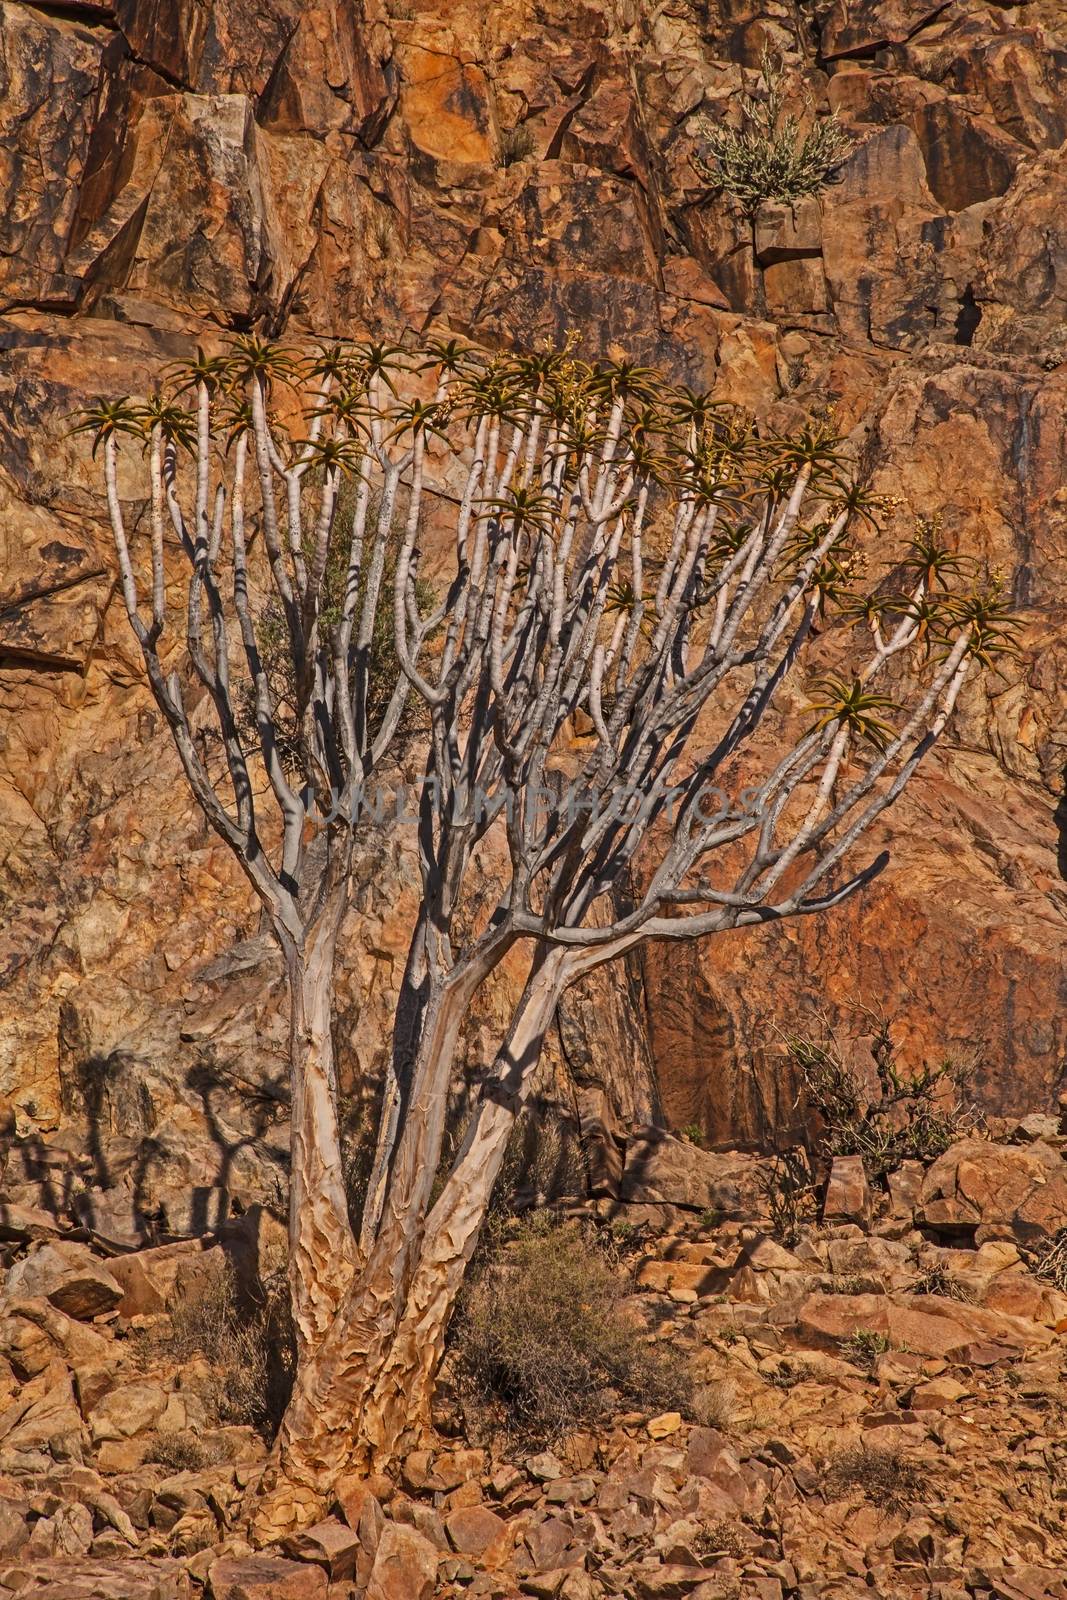 The endangered Giant Quiver tree Aloidendron pillansii photographed in the Richtersveld National Park South Africa.